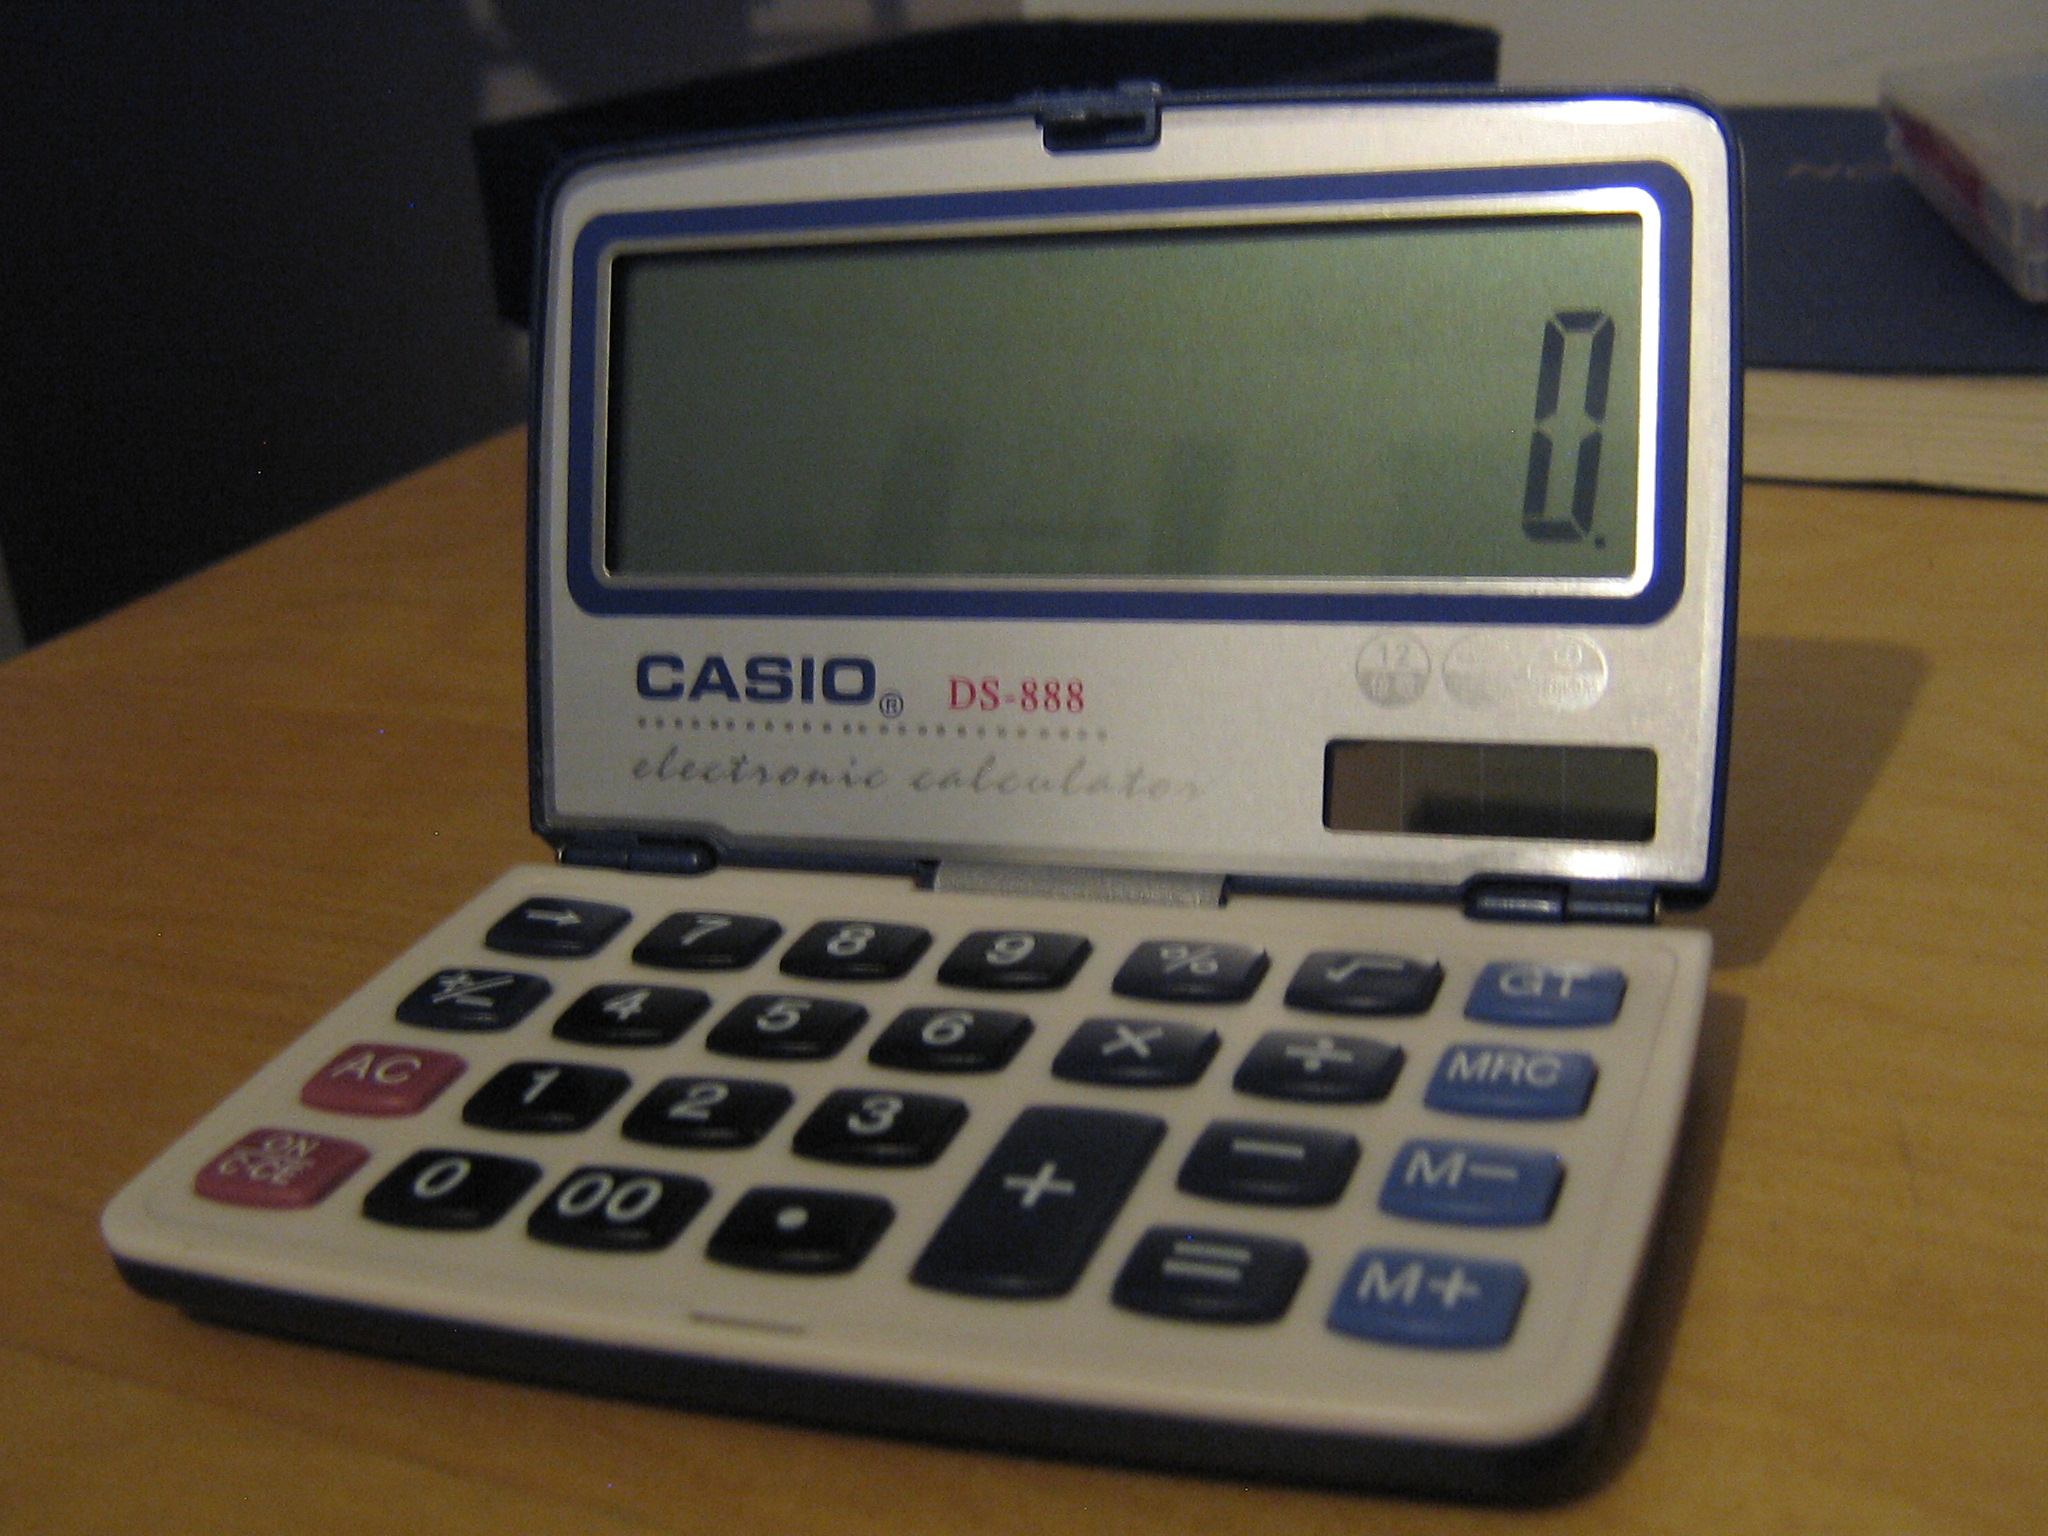 a calculator which folds open and closed, currently in its opened state.